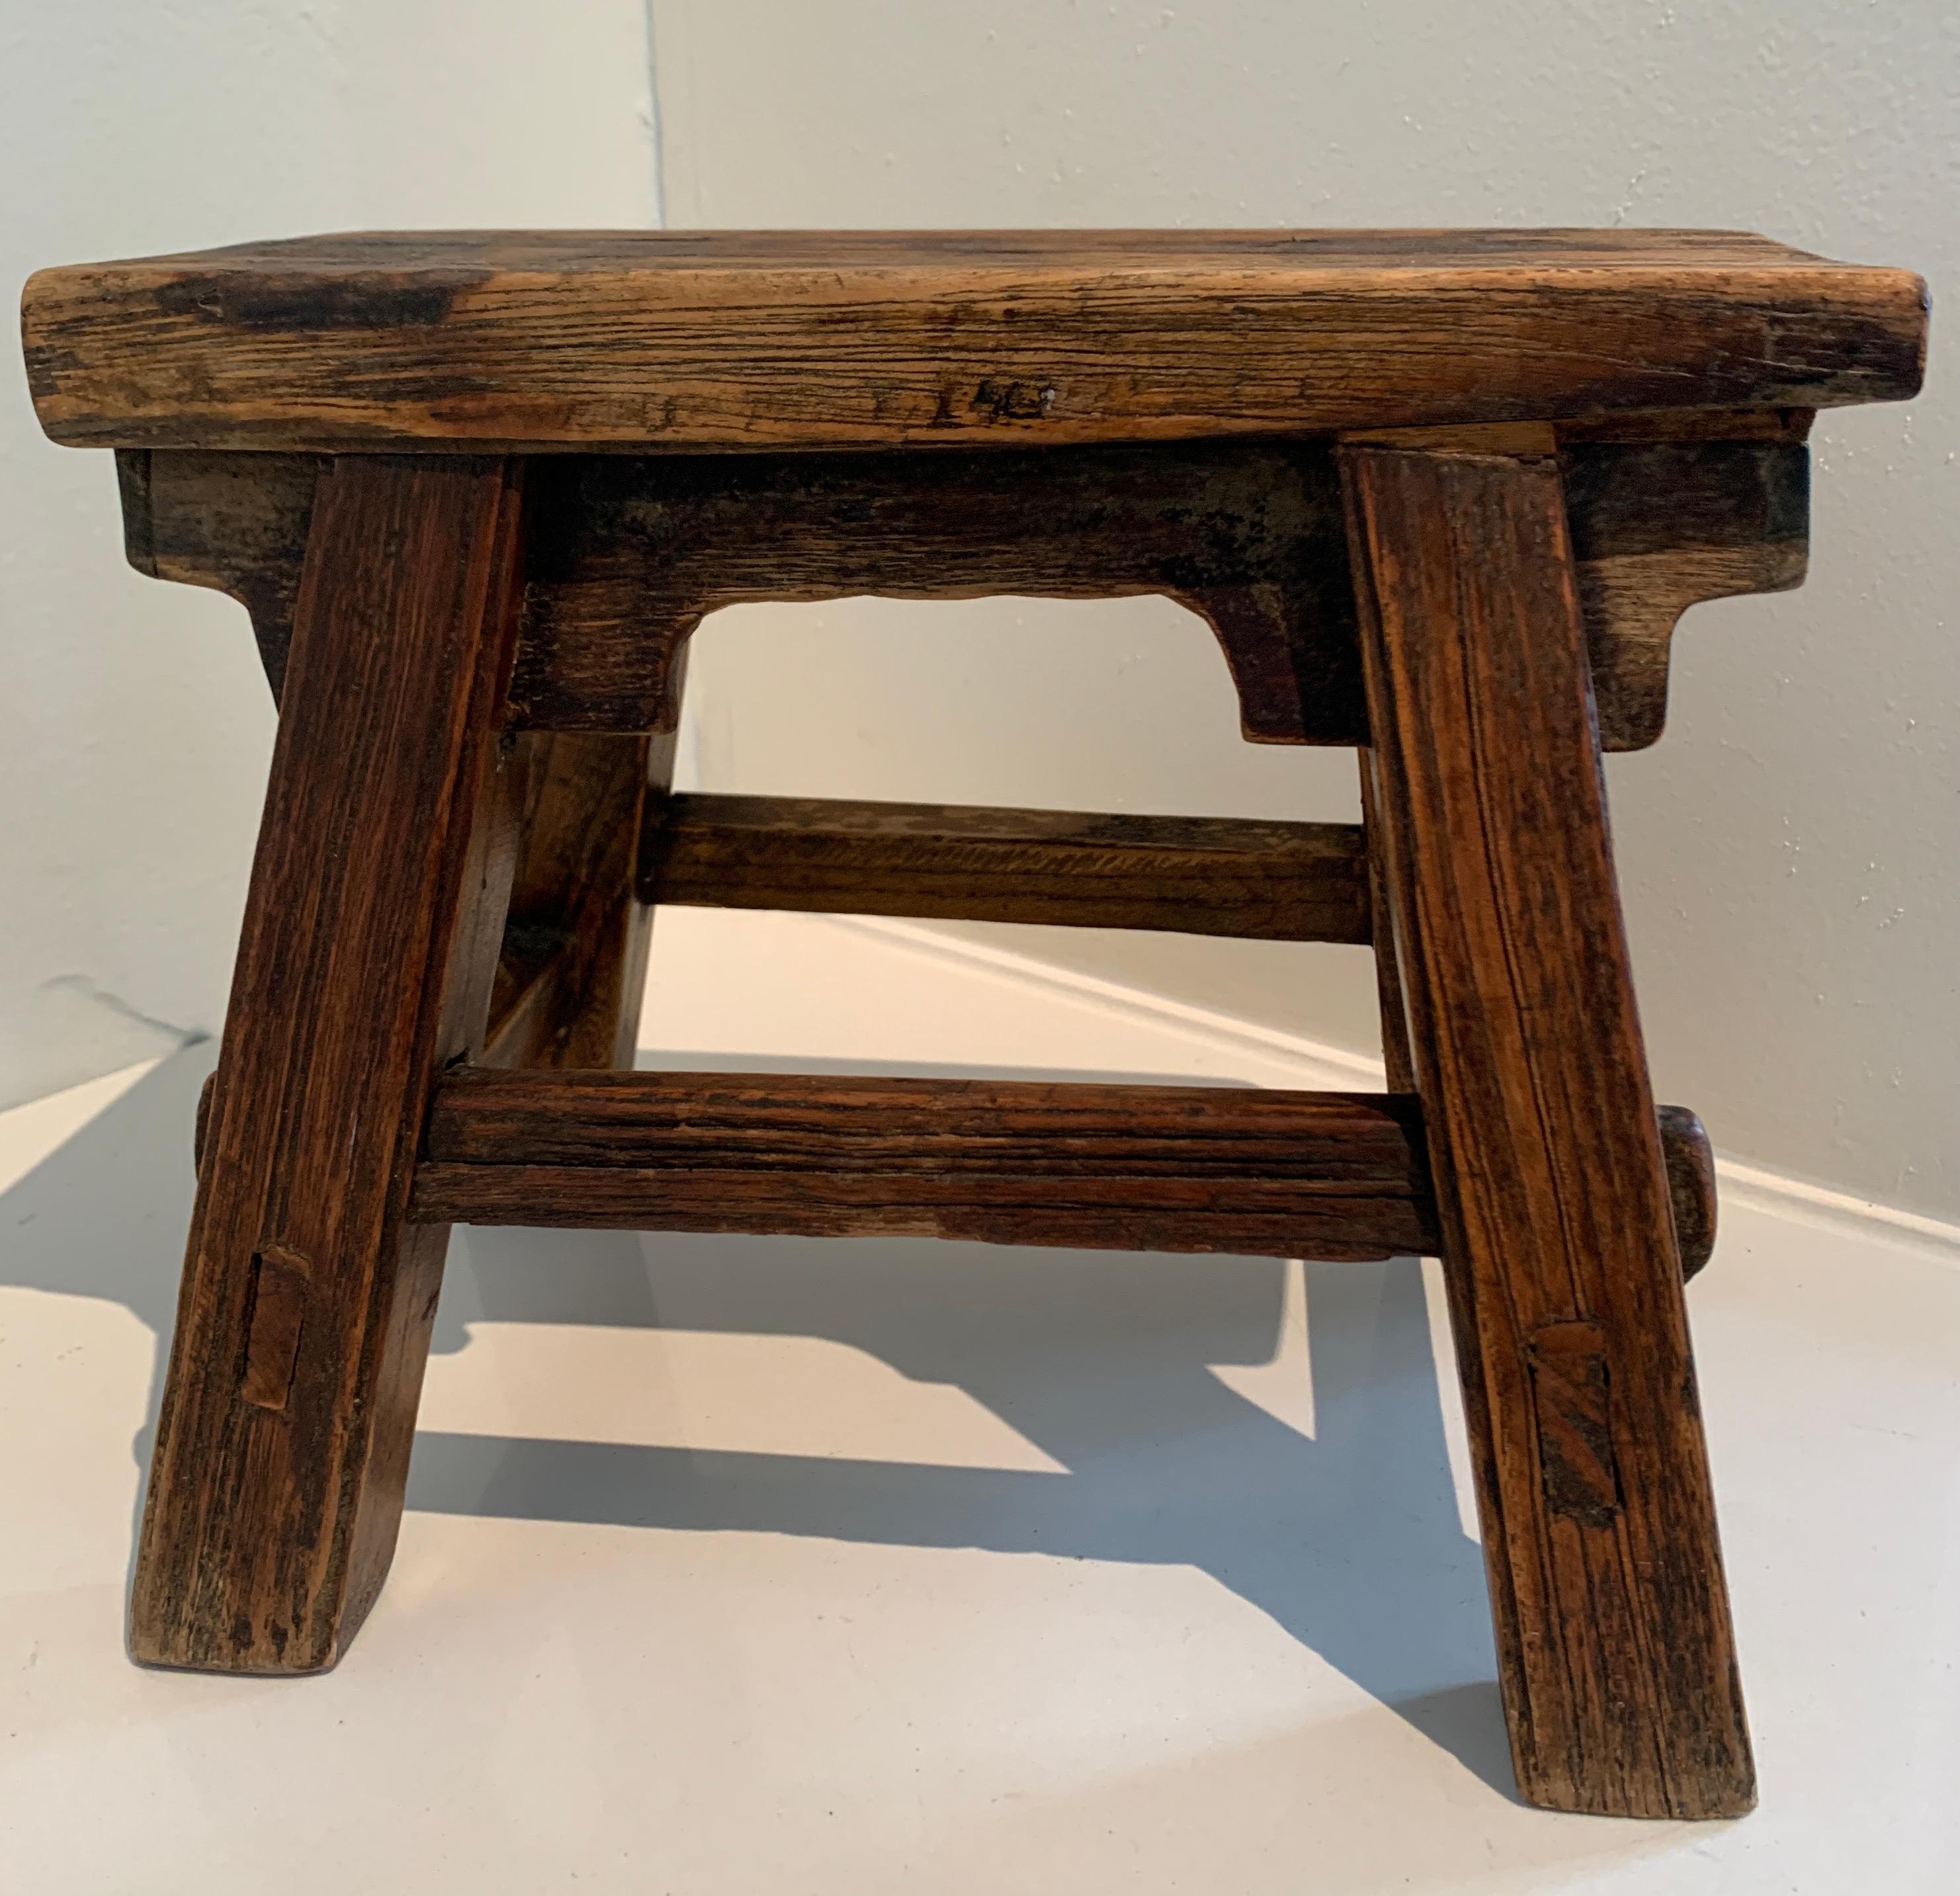 20th Century Hand Made Wooden Milk or Step Stool